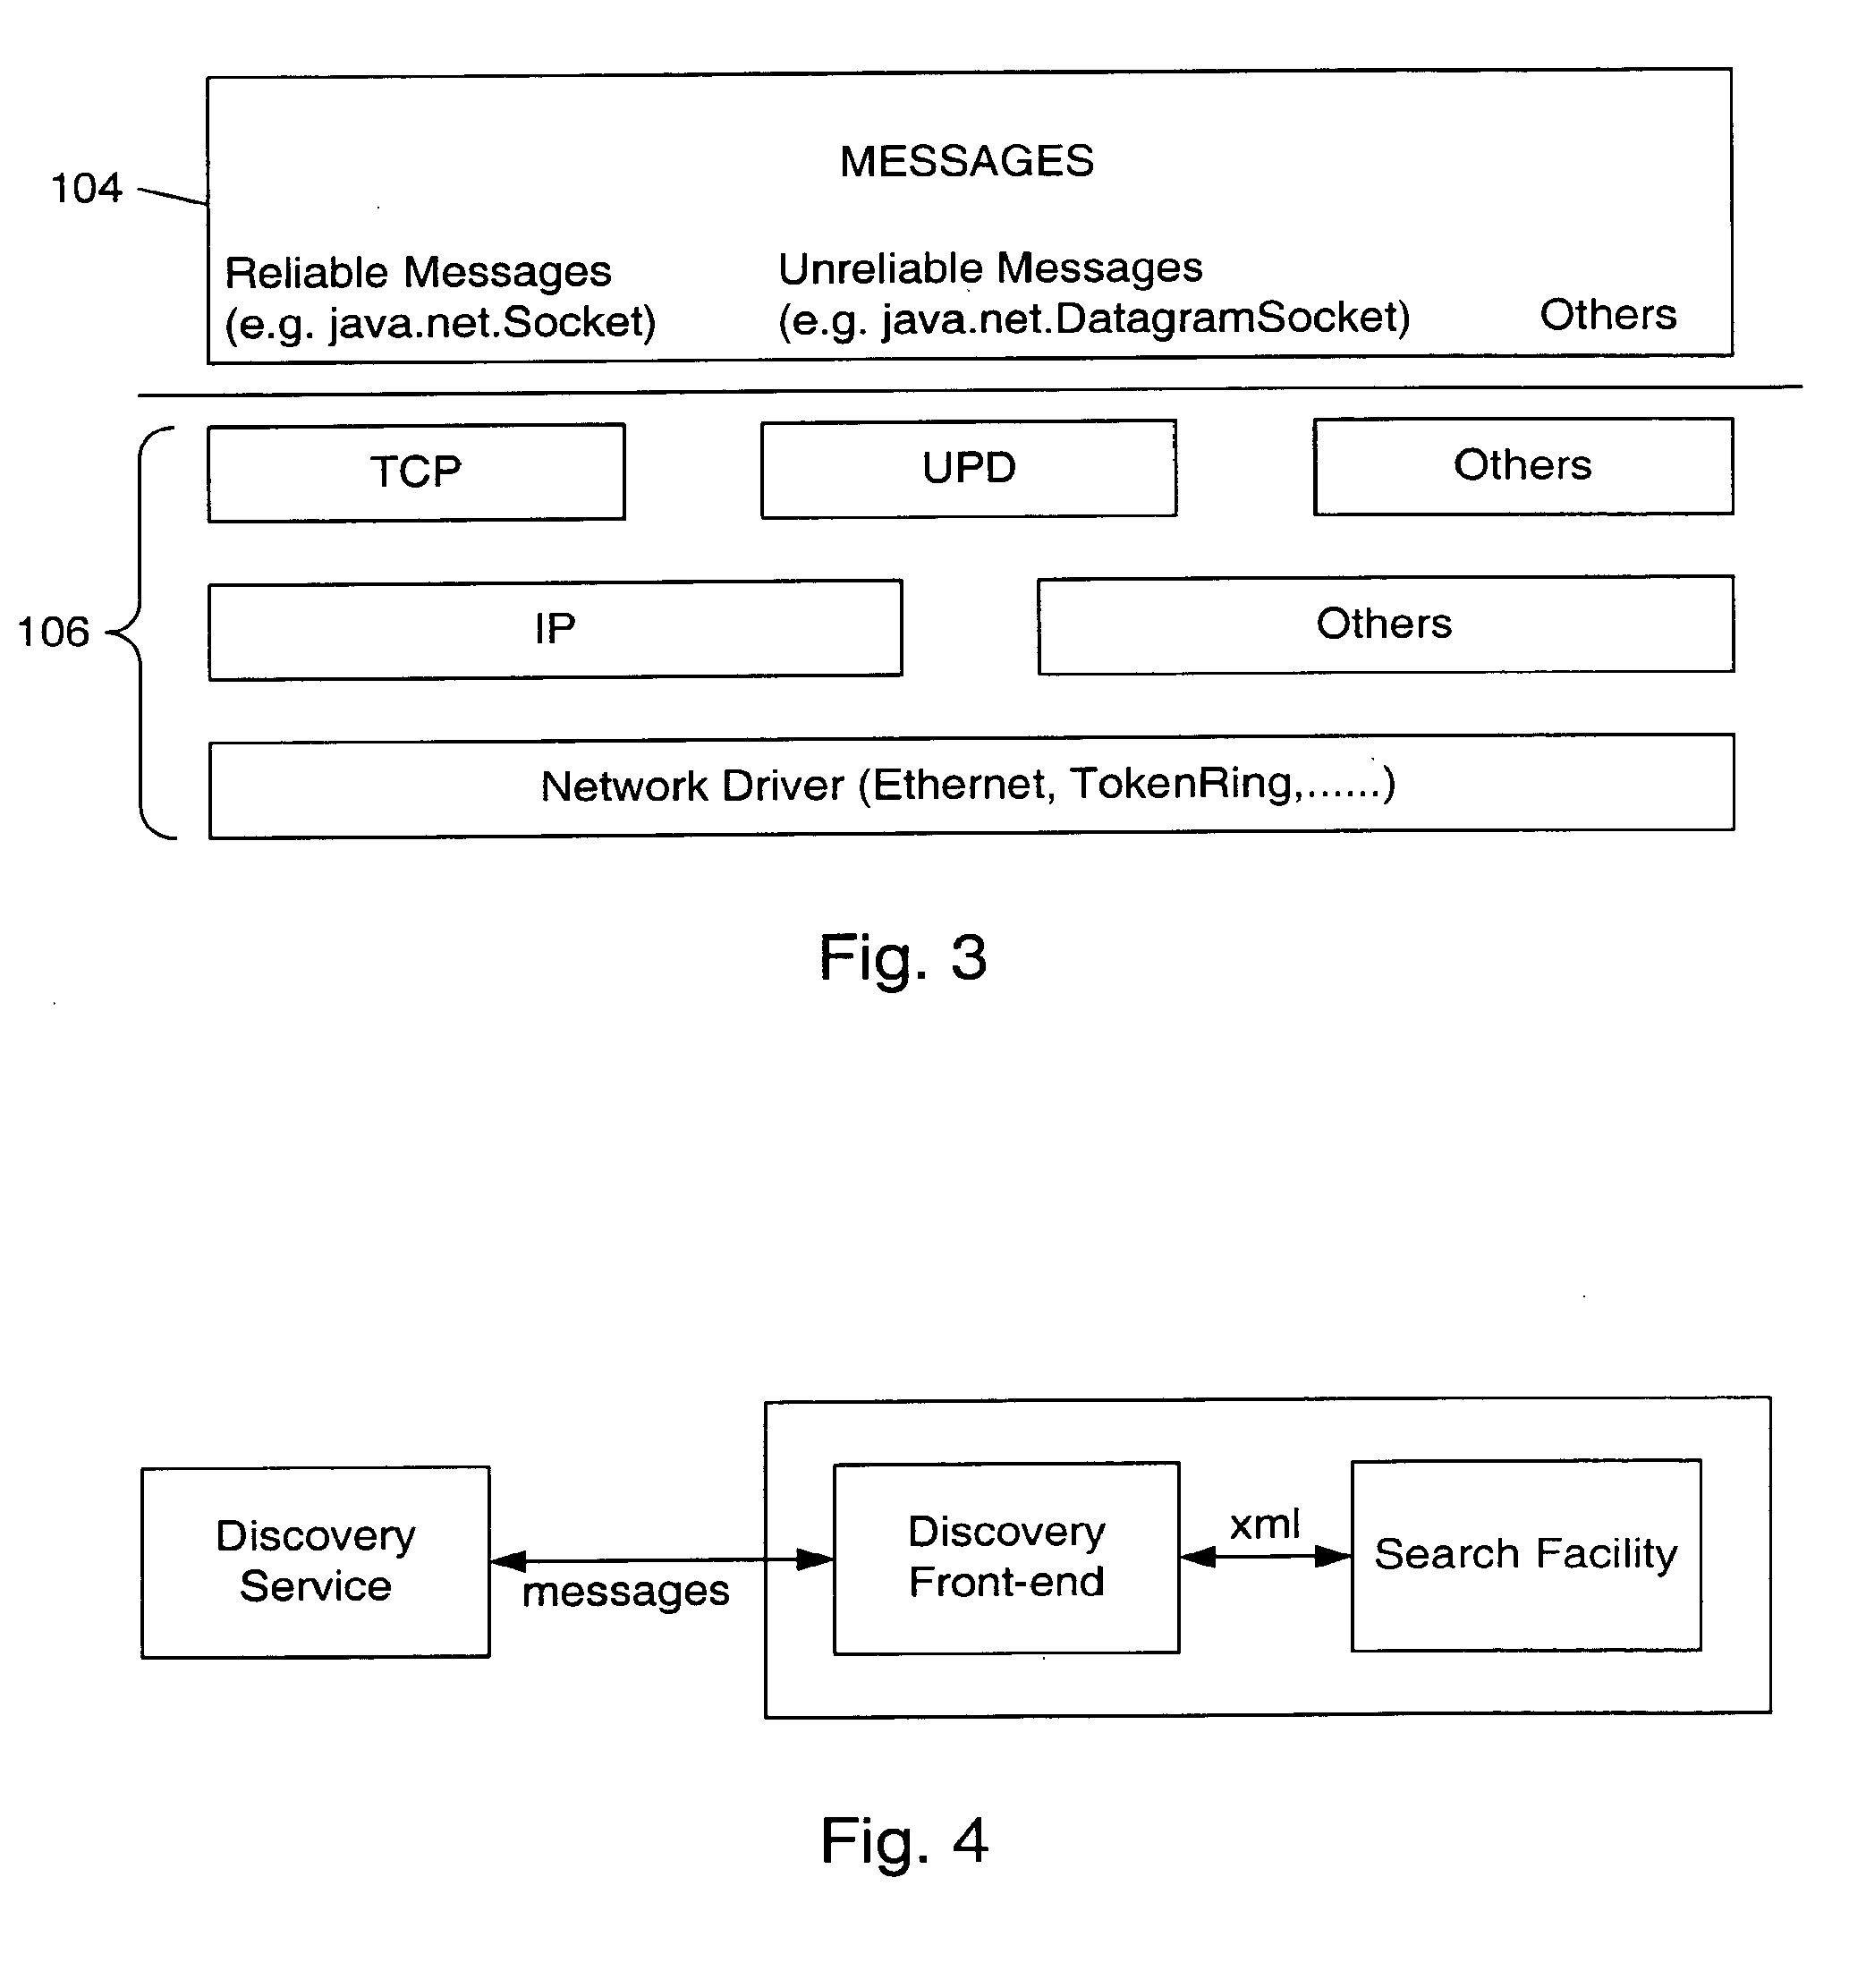 Dynamic Displays in a Distributed Computing Environment